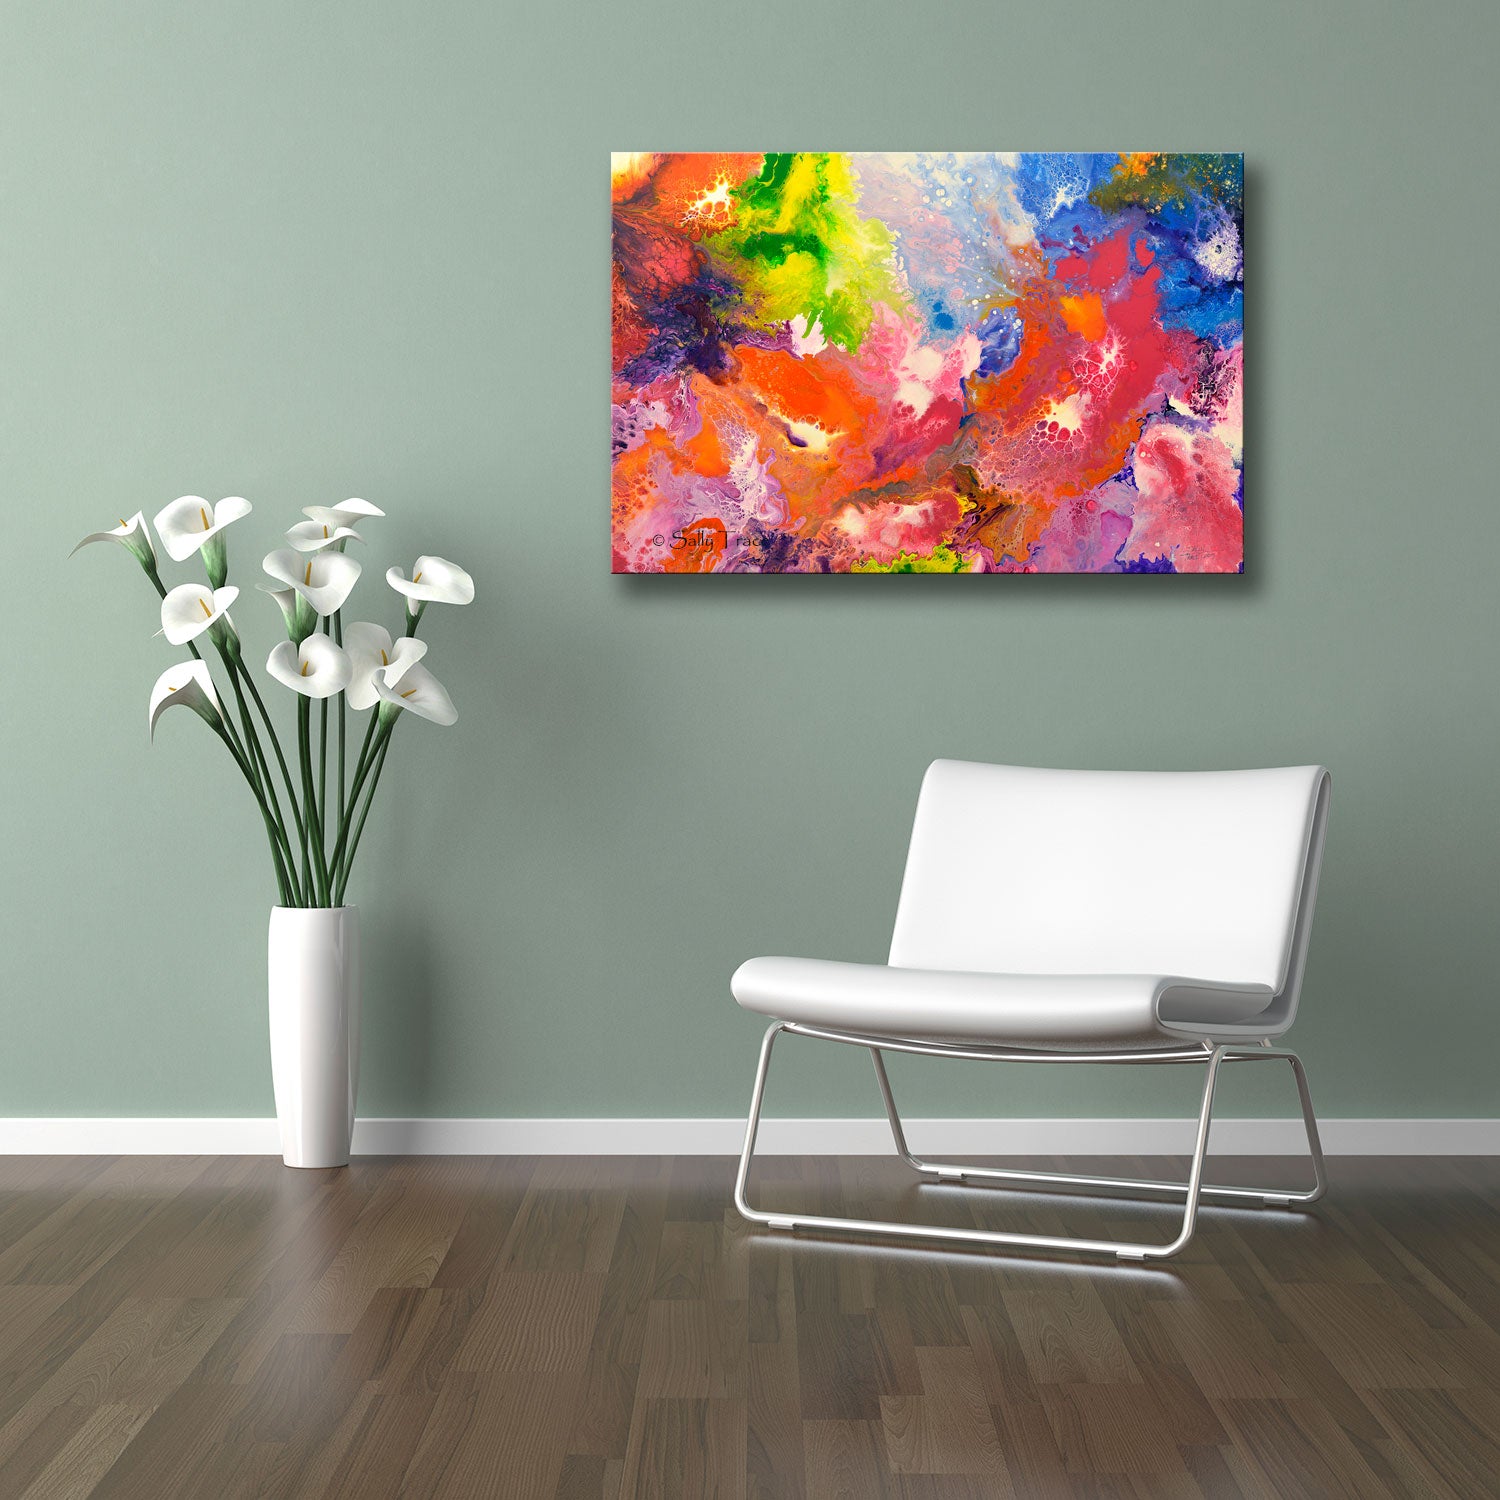 Modern giclee print on sale from my fluid abstract painting Playful Persuasion